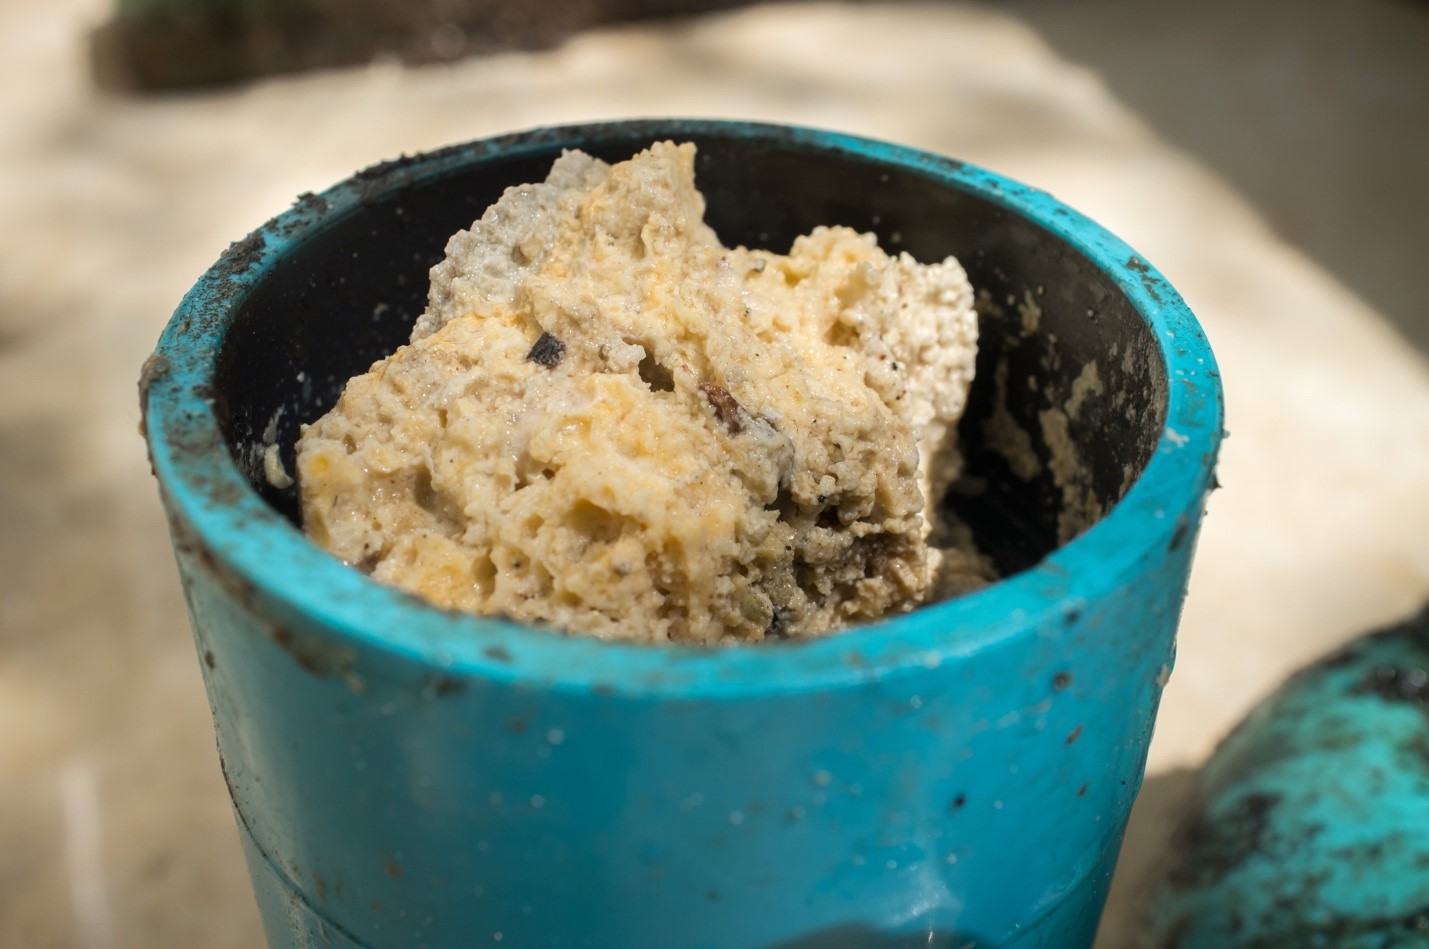 Improper grease disposal leads to clogged pipes and sewer systems.